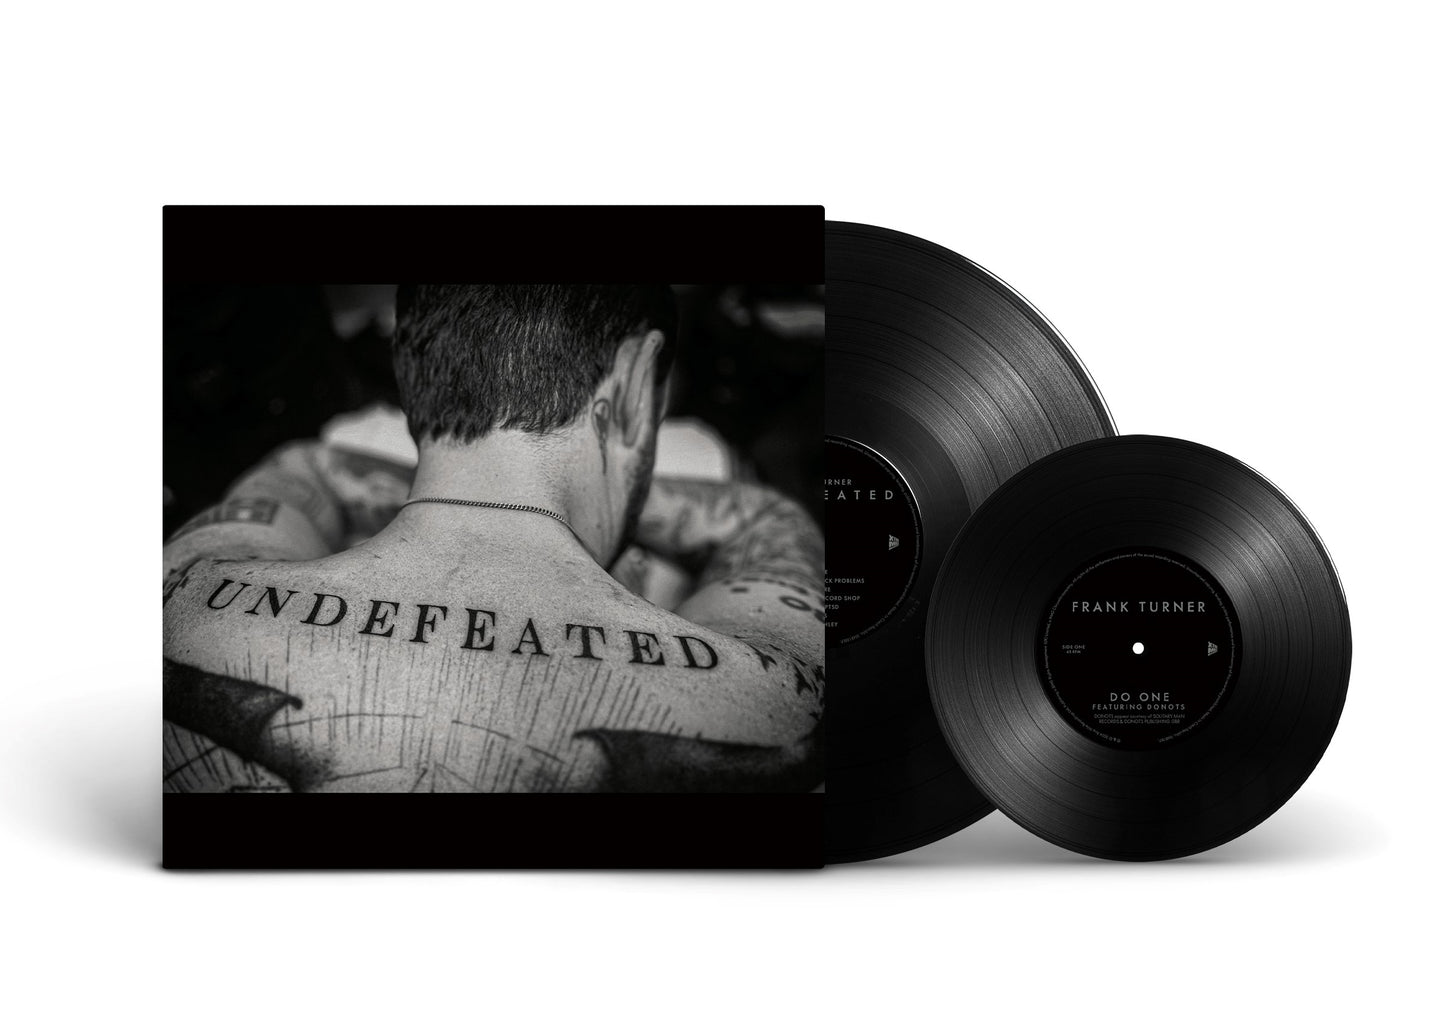 FRANK TURNER • Undefeated • LP+7" / DoCD / CD